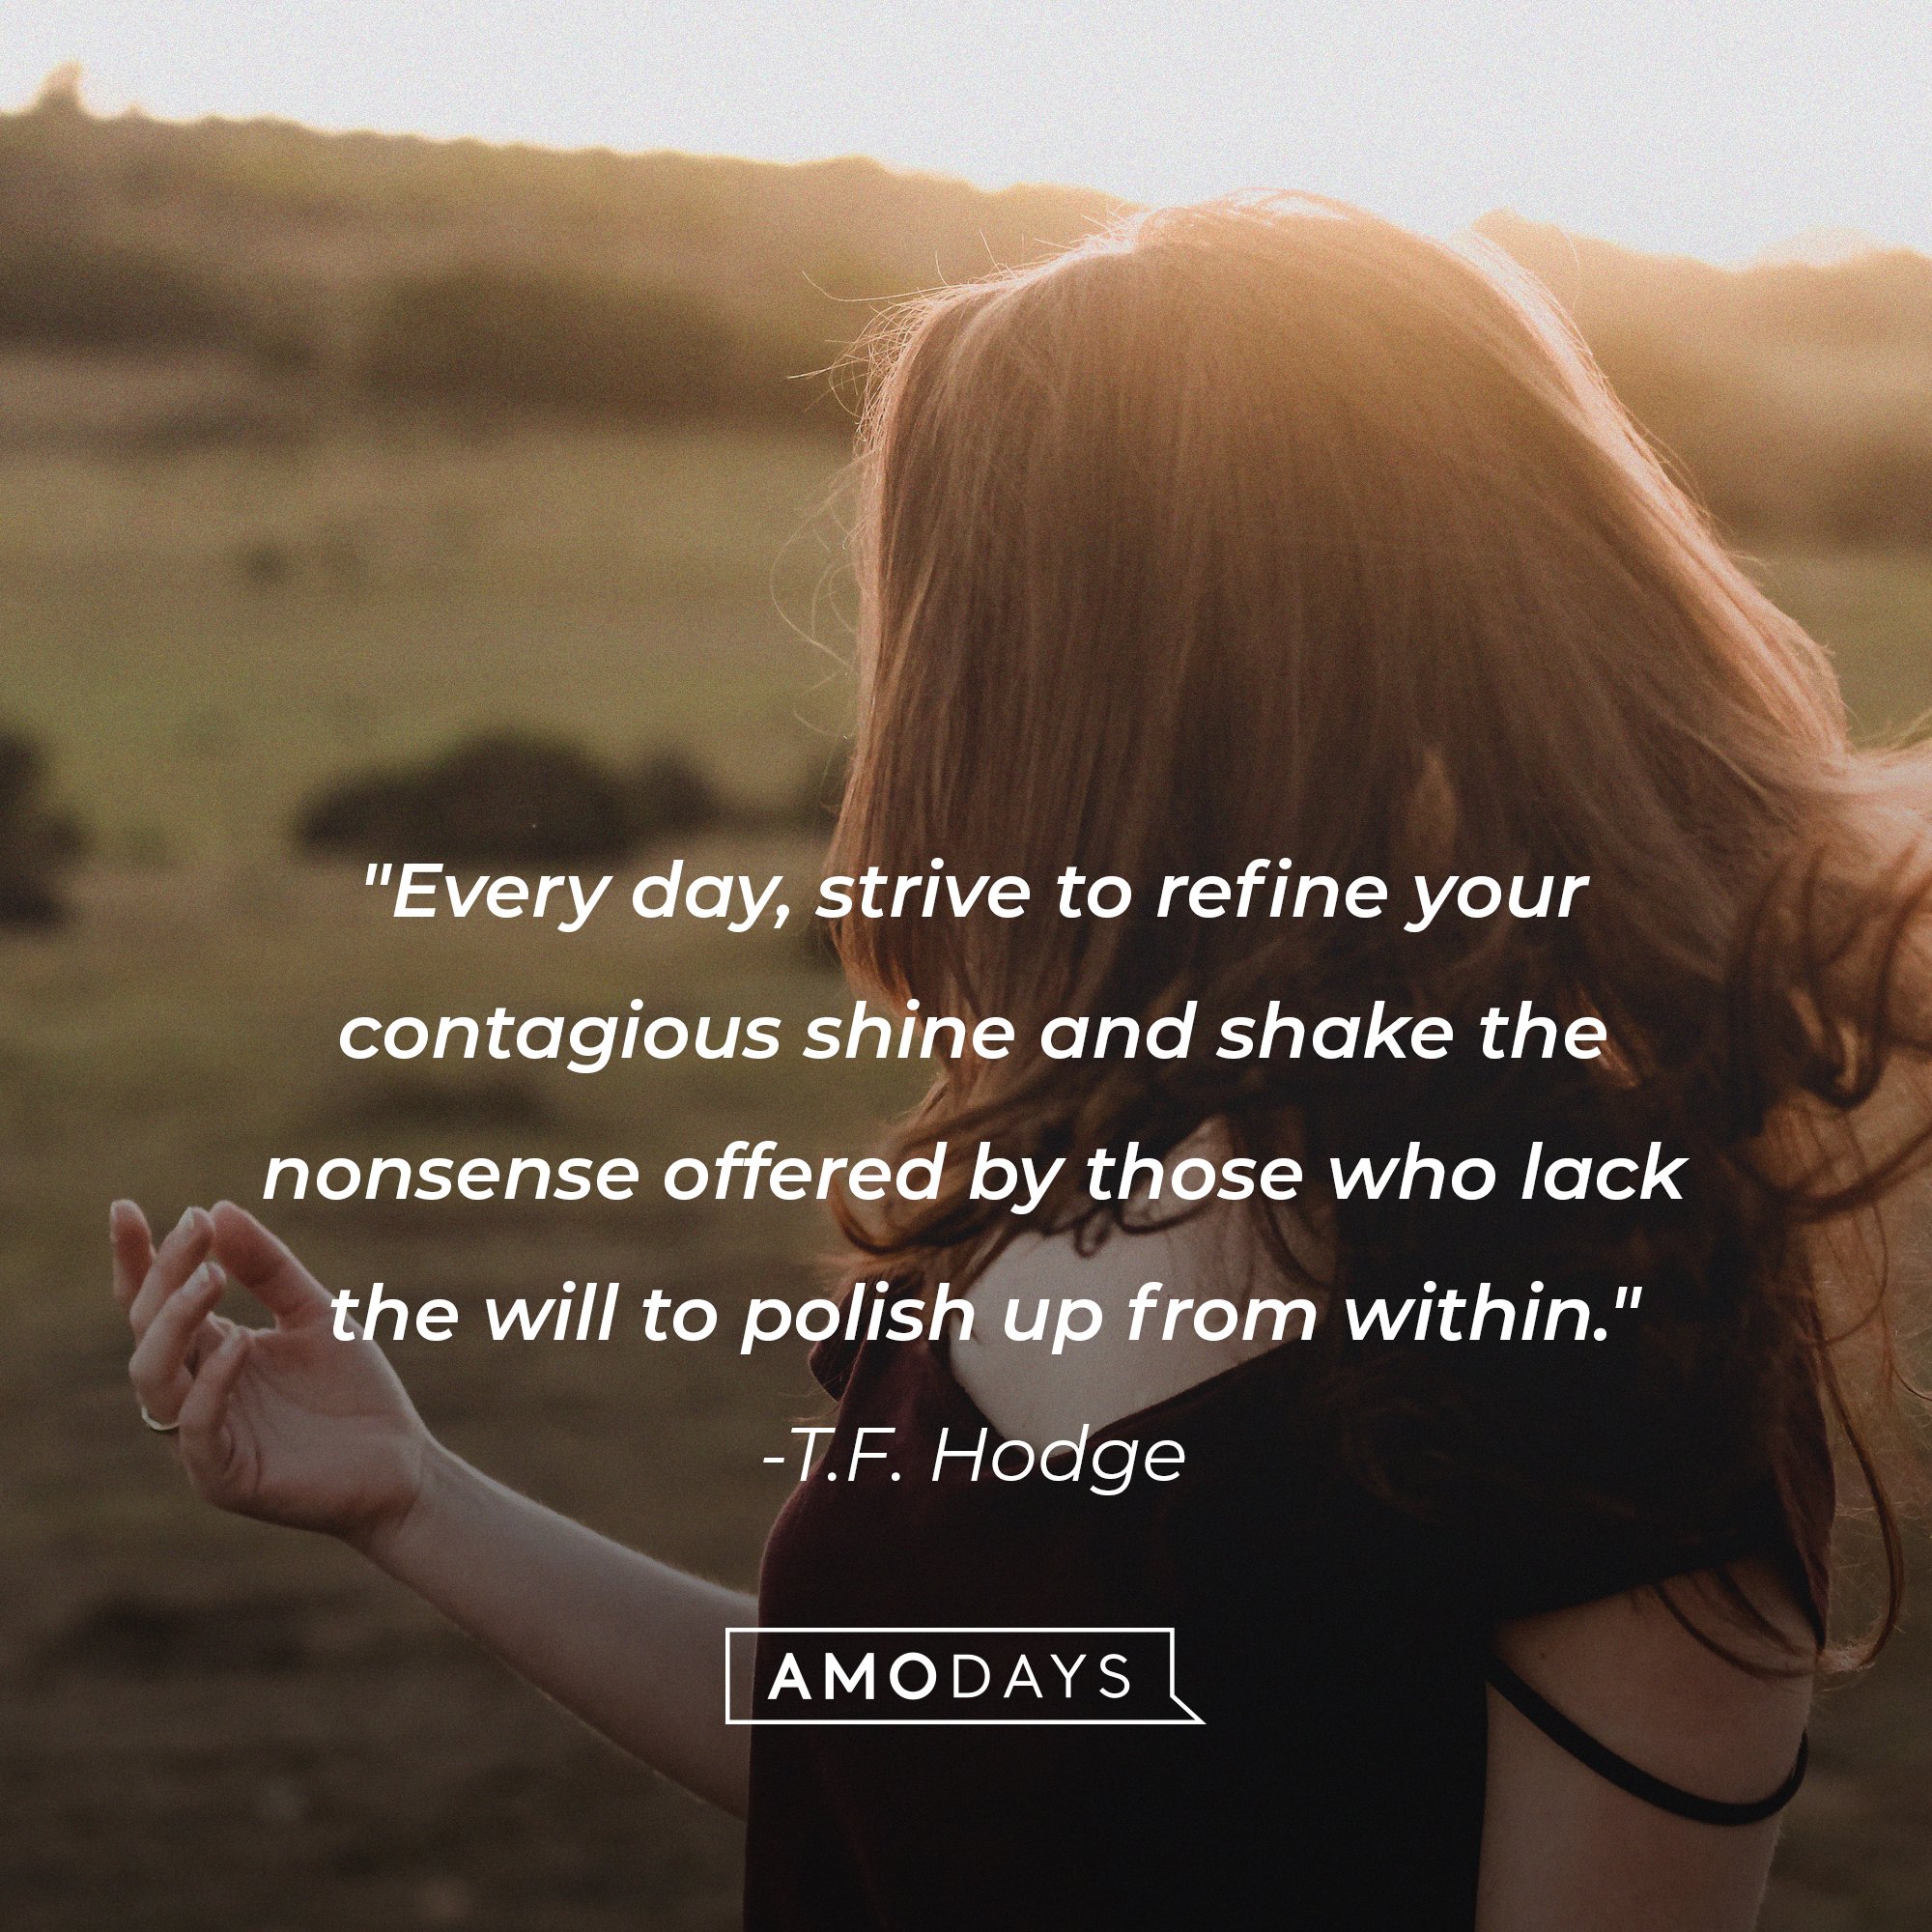 T.F. Hodge’s quote: 'Every day, strive to refine your contagious shine and shake the nonsense offered by those who lack the will to polish up from within." | Image: AmoDays 